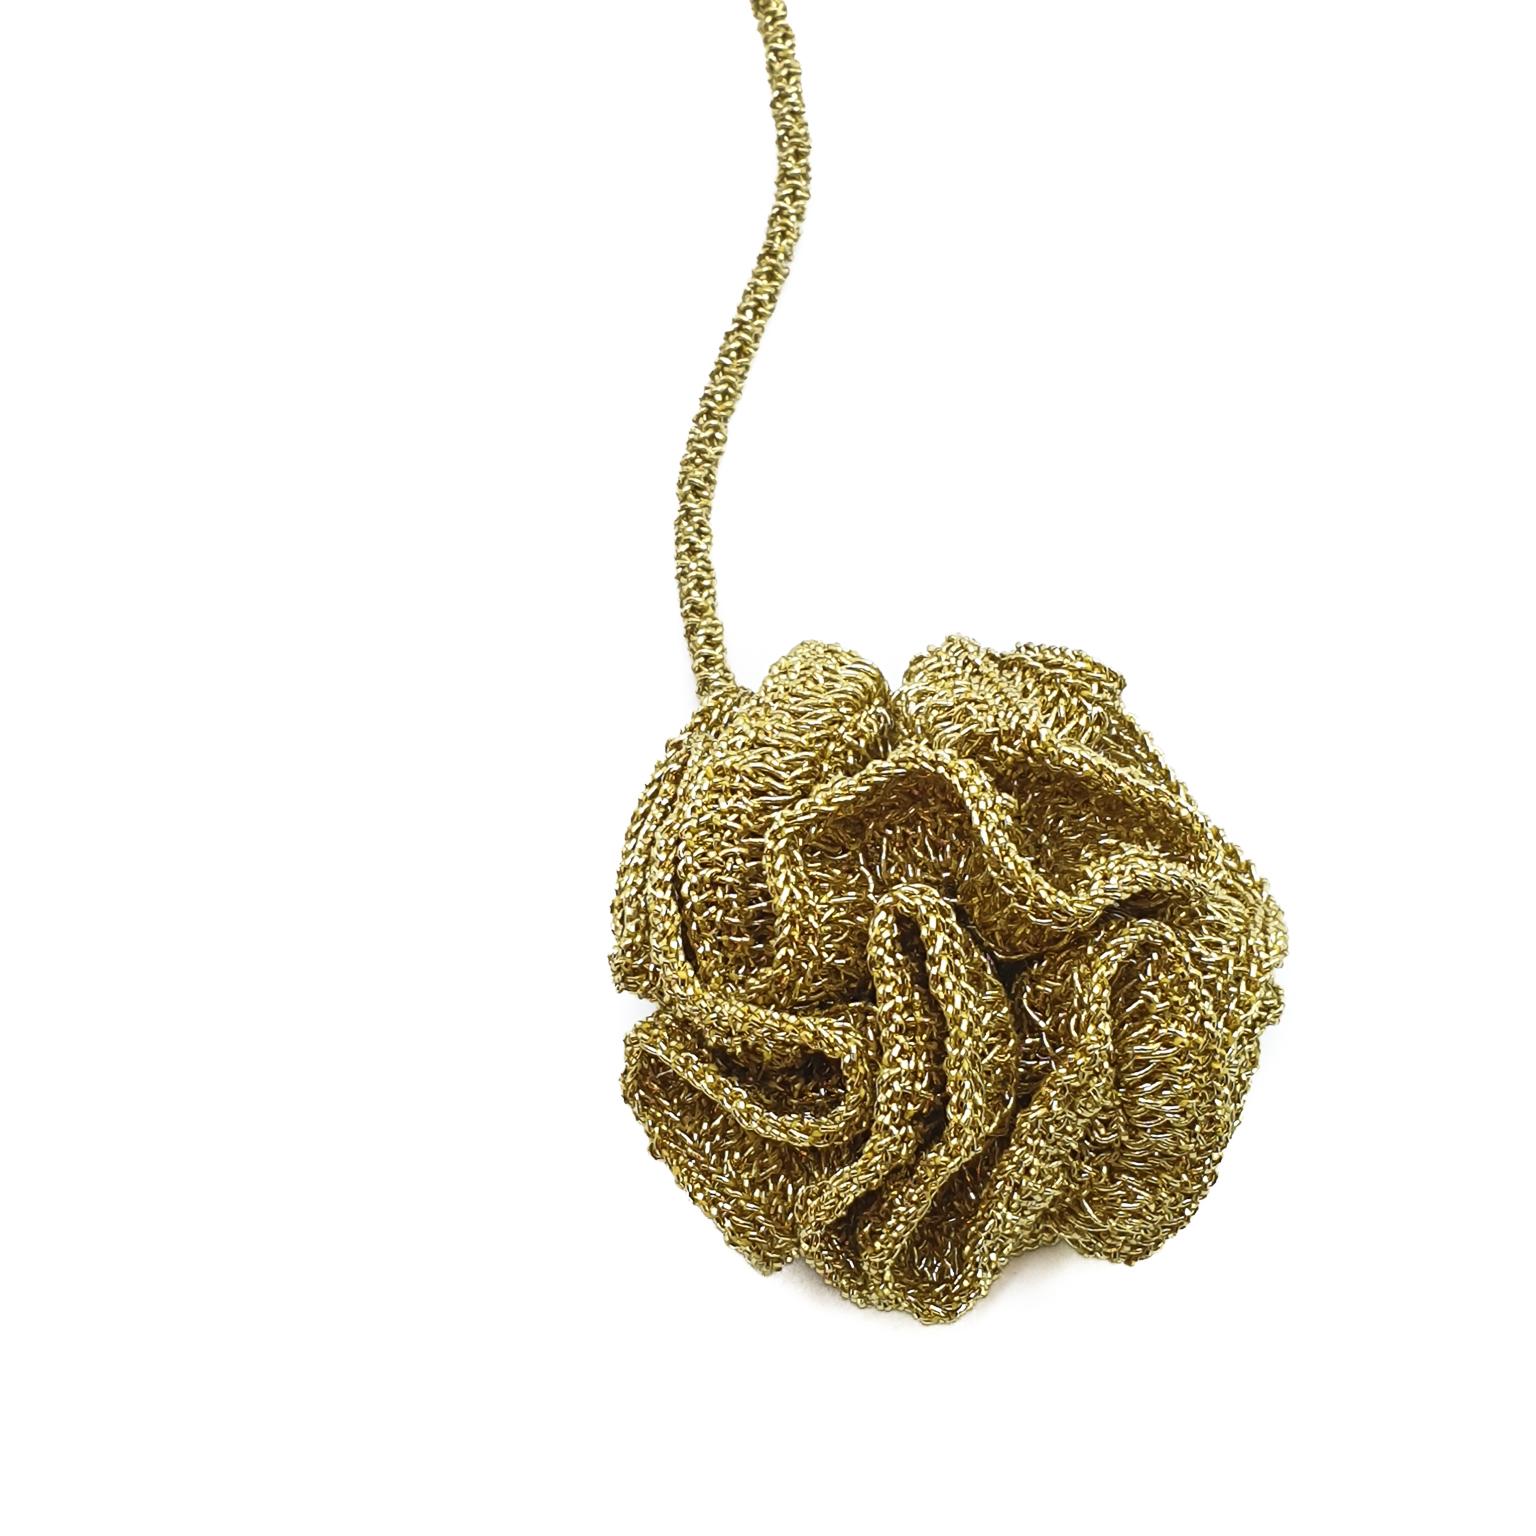 This is a free form crochet coral necklace. It is delicate and yet makes a statement.

This necklace can be custom made. 

The necklace is crochet with a smooth passing thread. It is a cotton thread coated with a gold color polymer. It has no metal